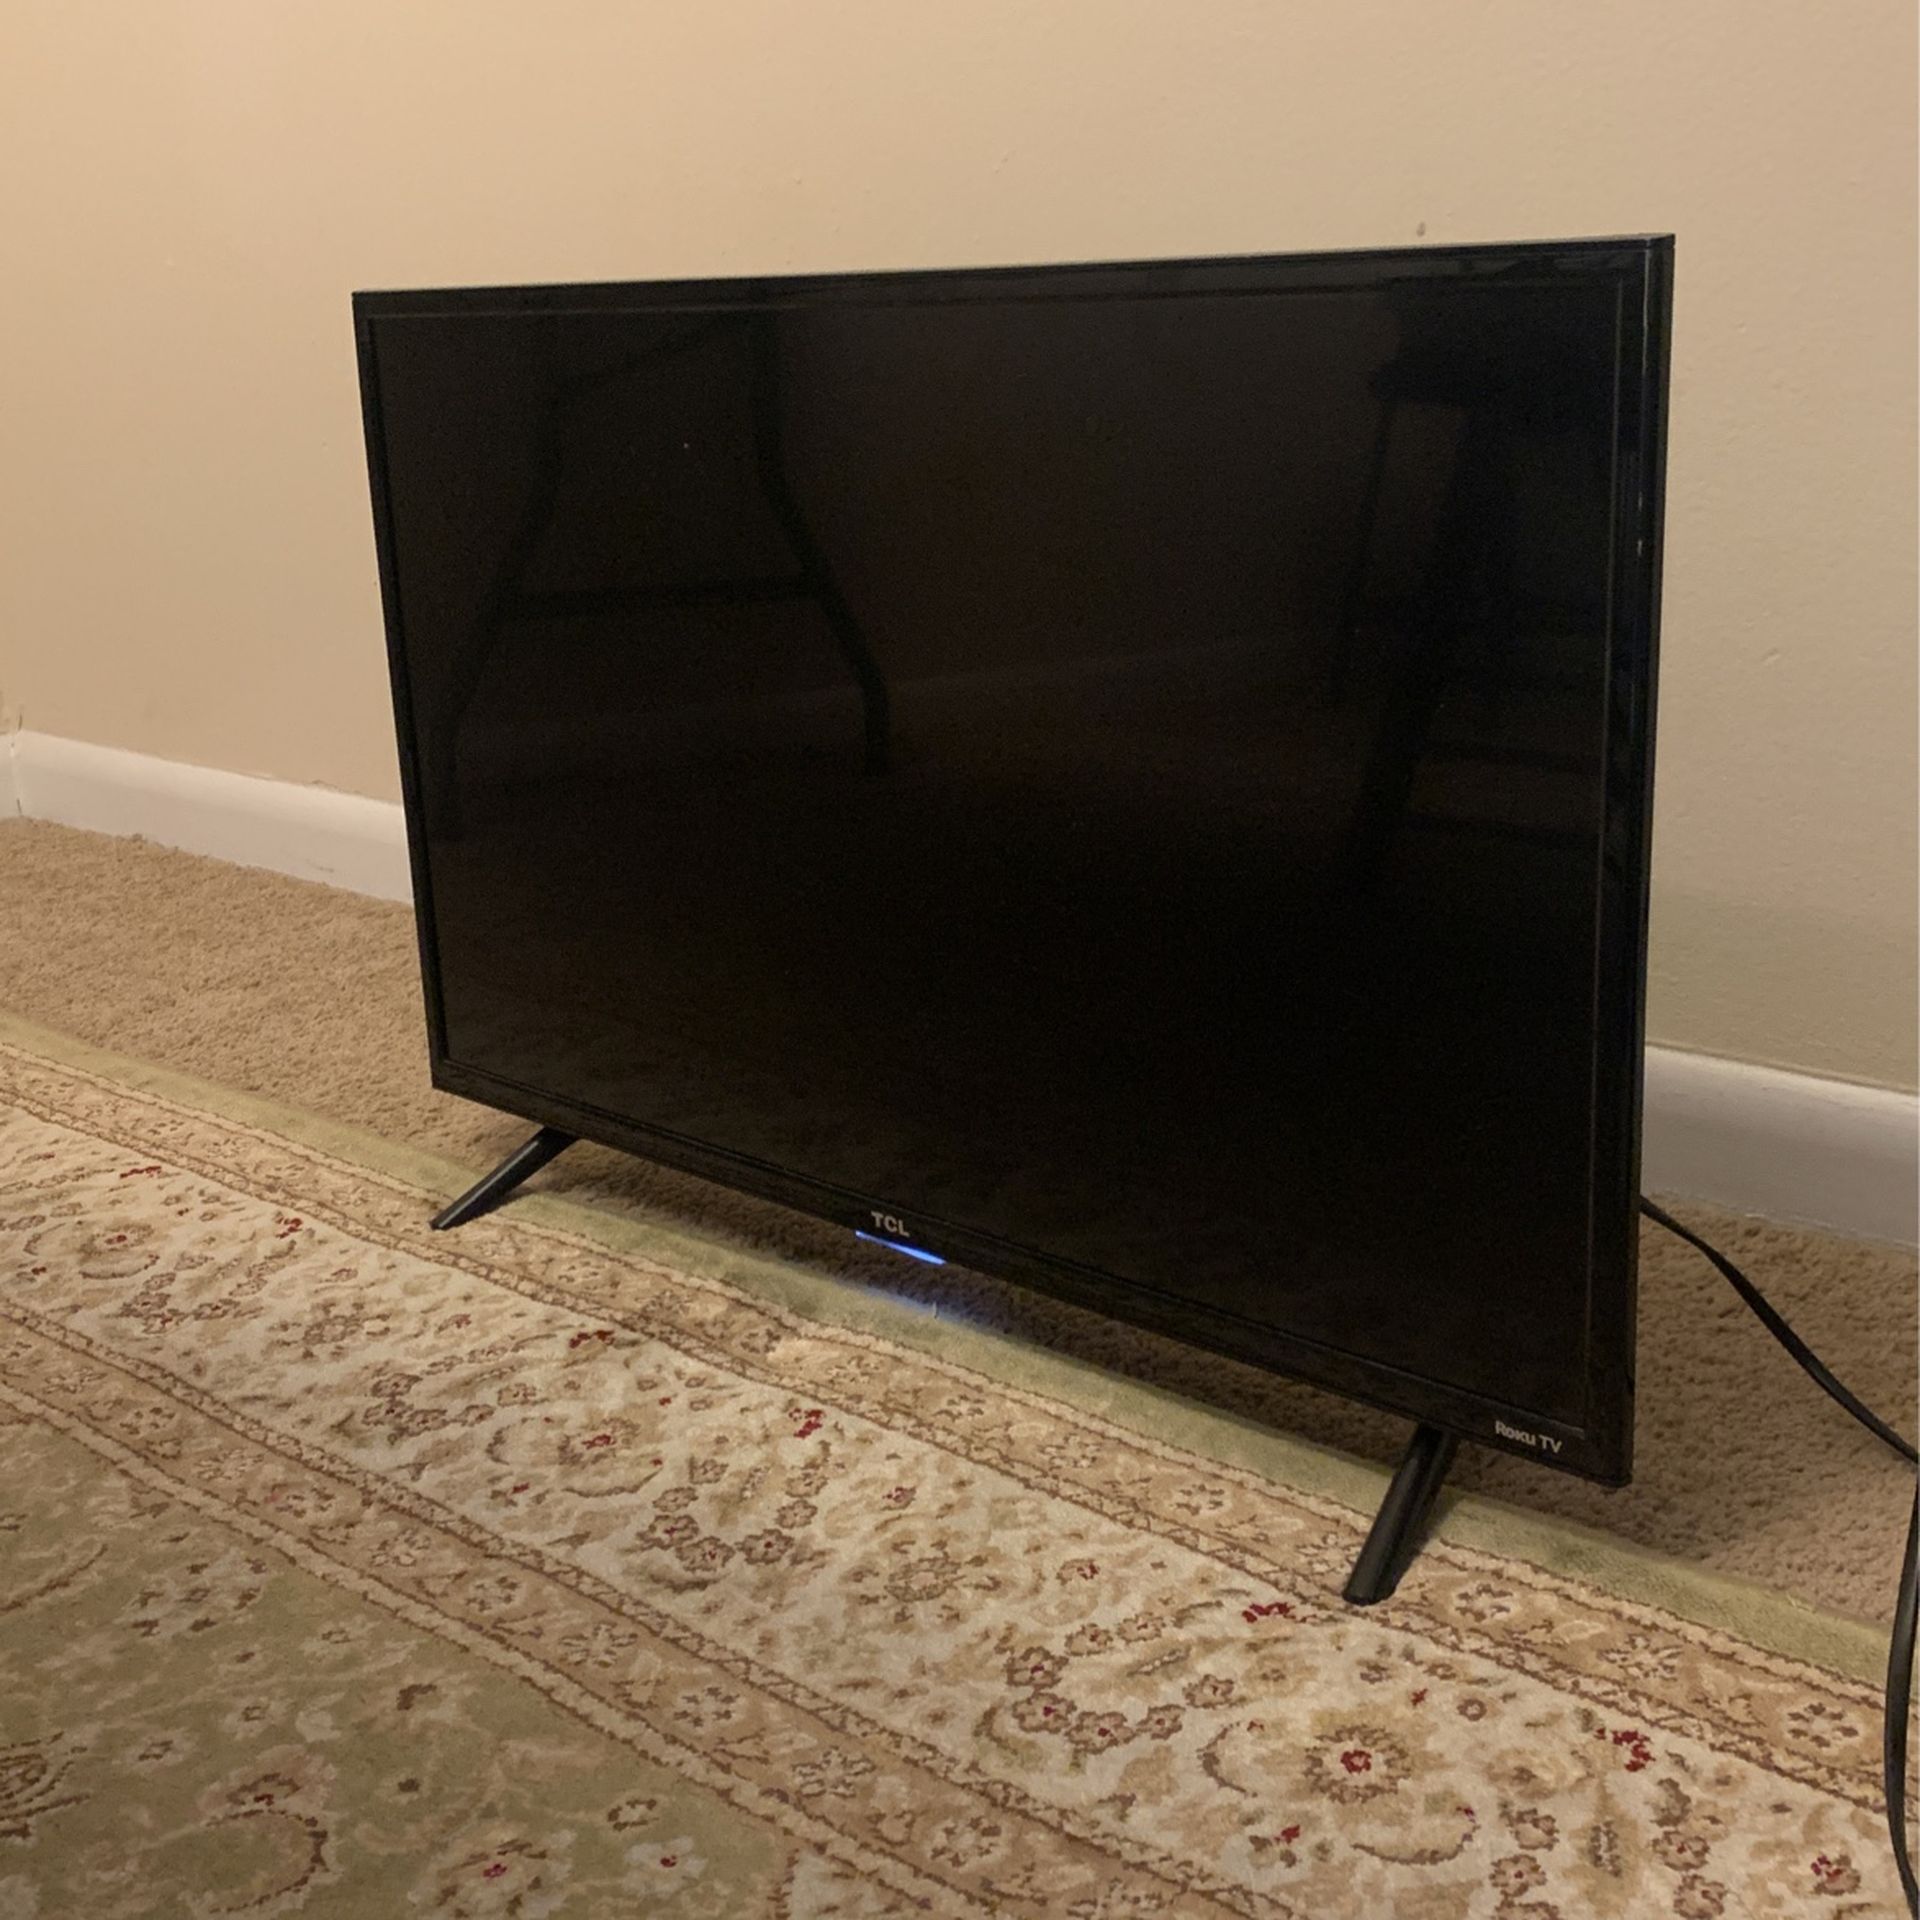 Roku TCL TV - 32" with remote 